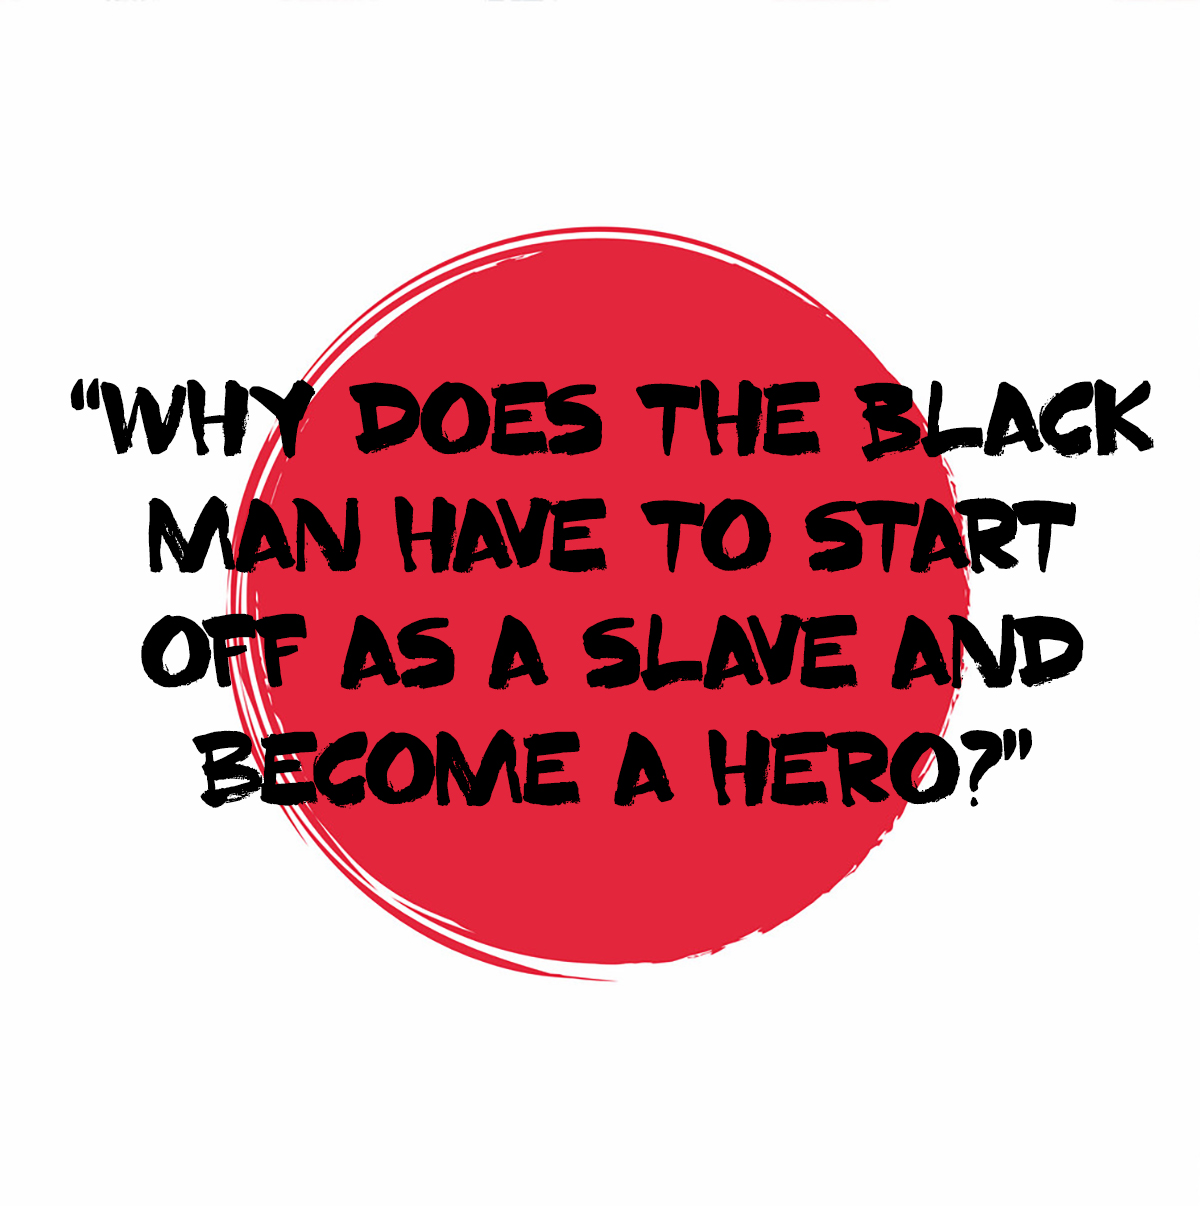 Why does the Black man have to start off as a slave and become a hero?